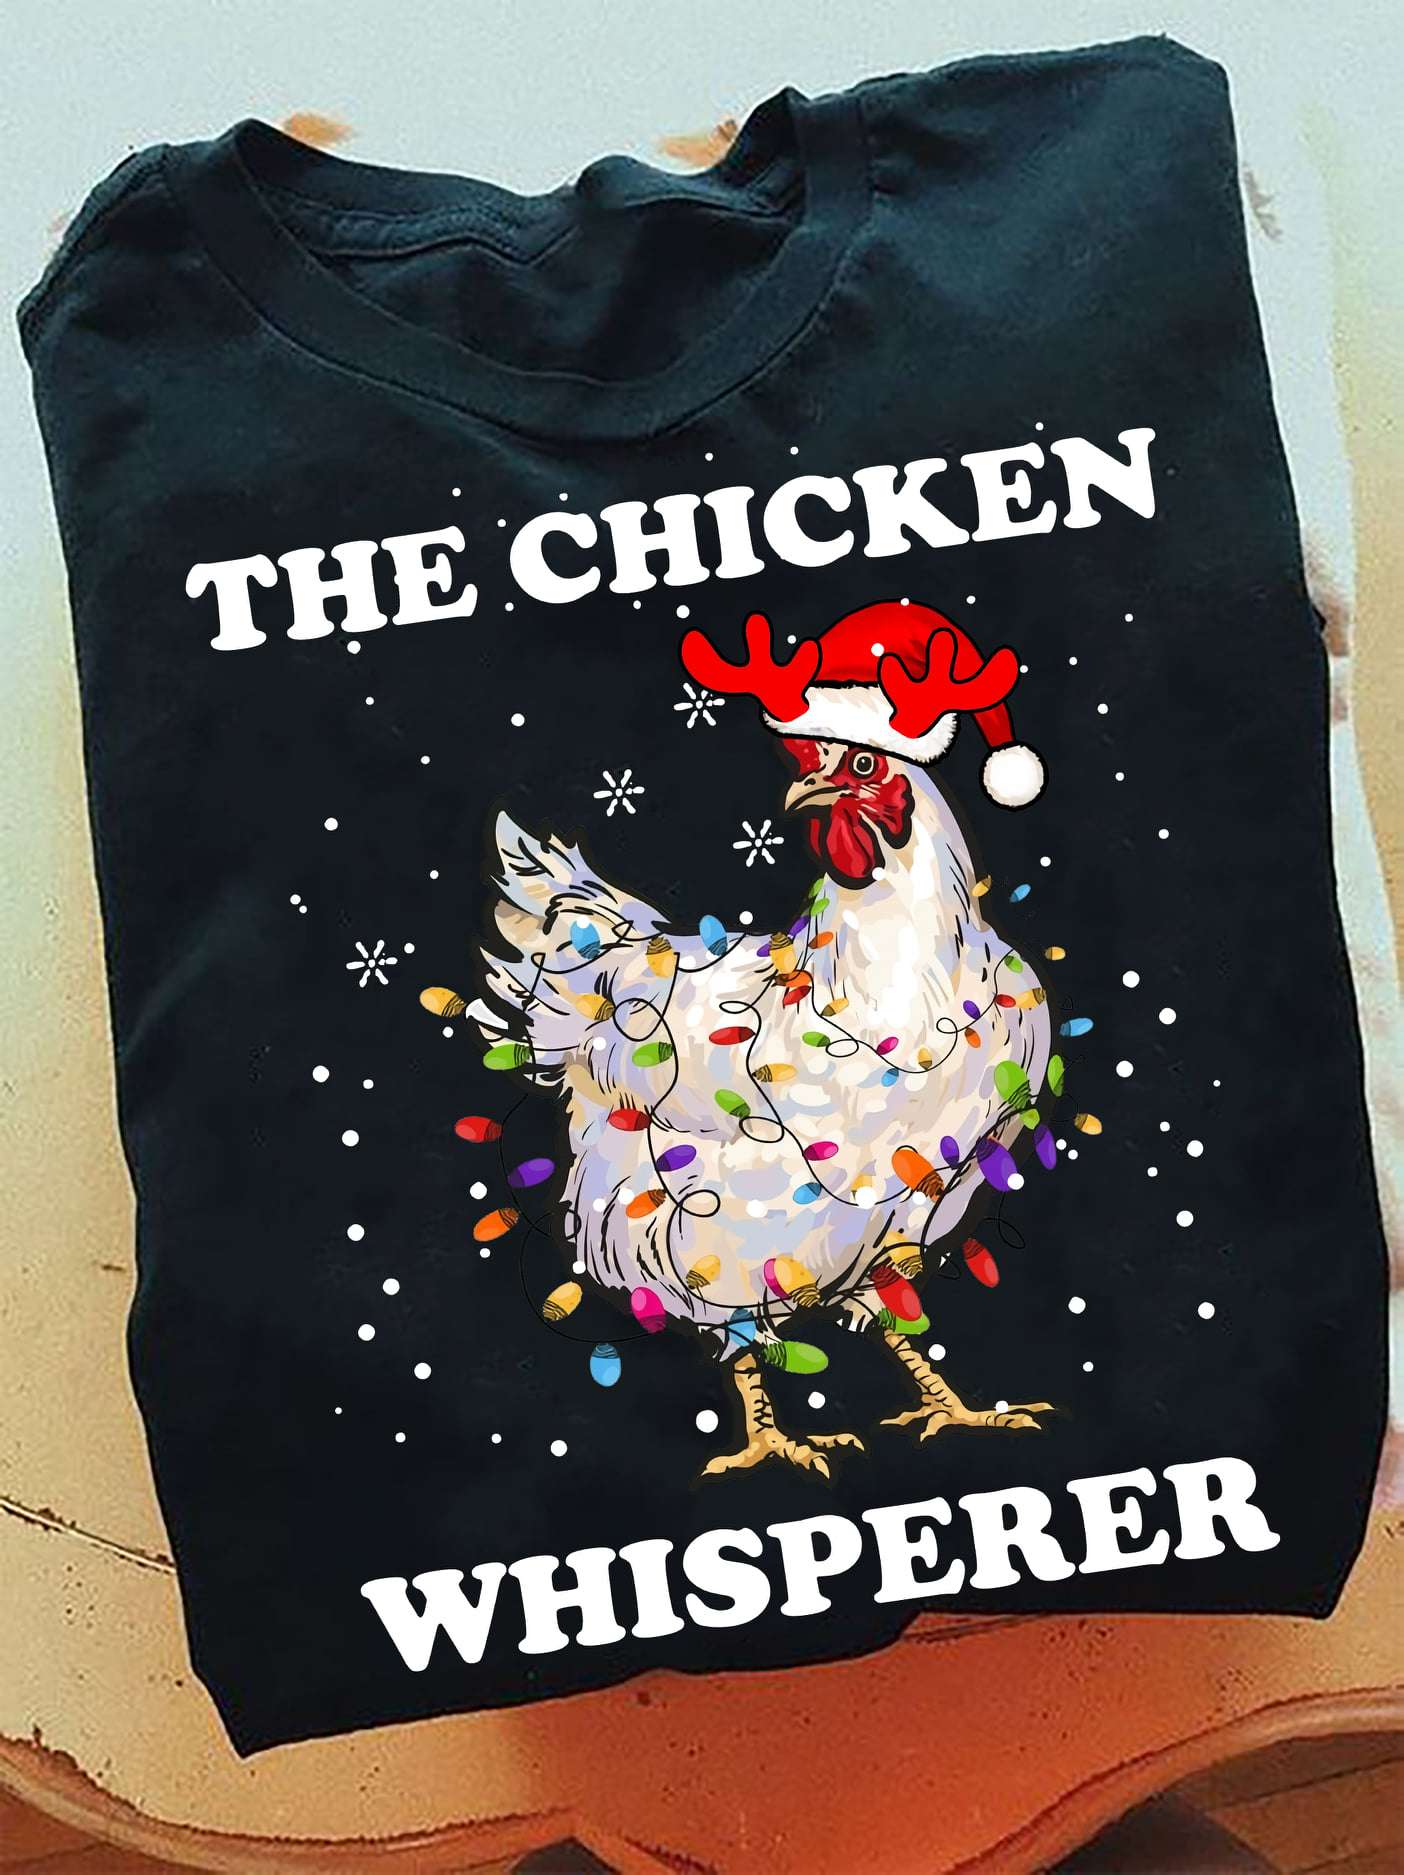 The chicken whisperer - Christmas day gift, Chicken wearing Christmas hat